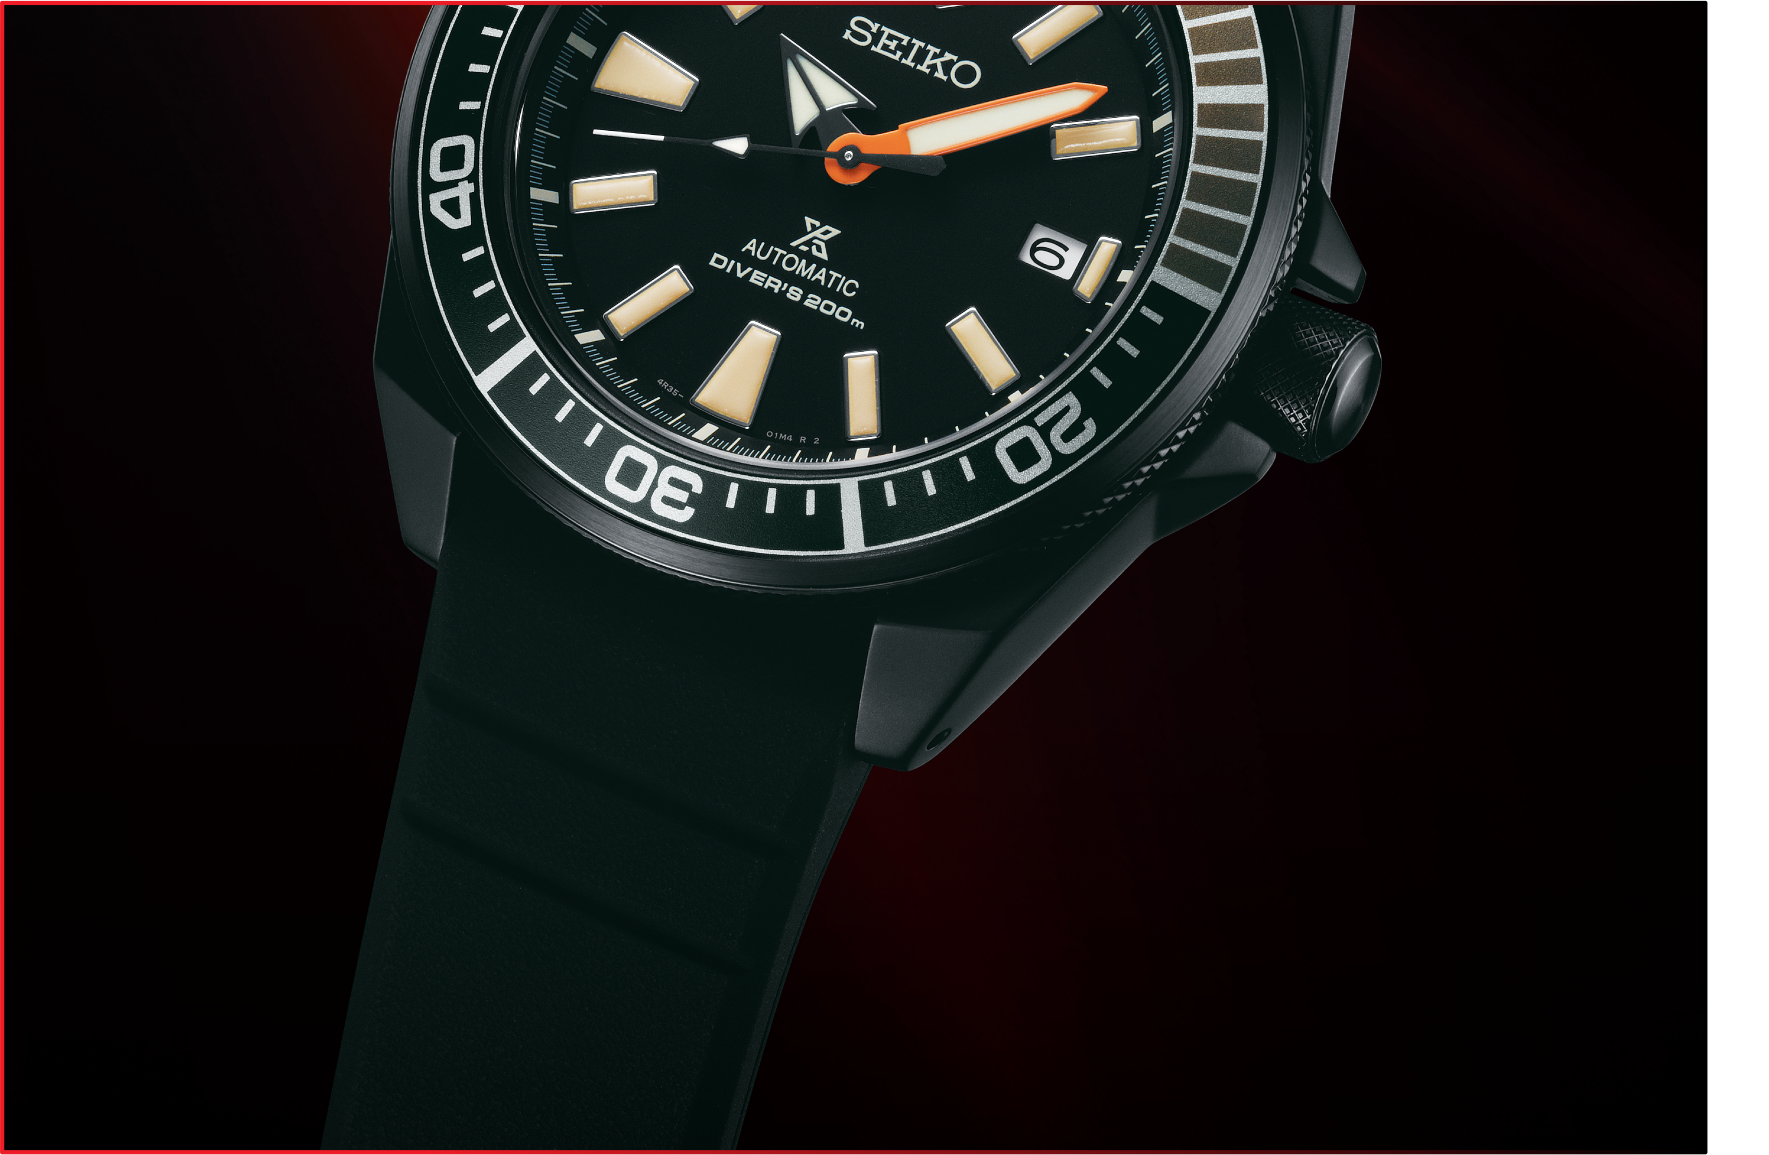 Prospex Black Series Limited Edition Diver's Watches